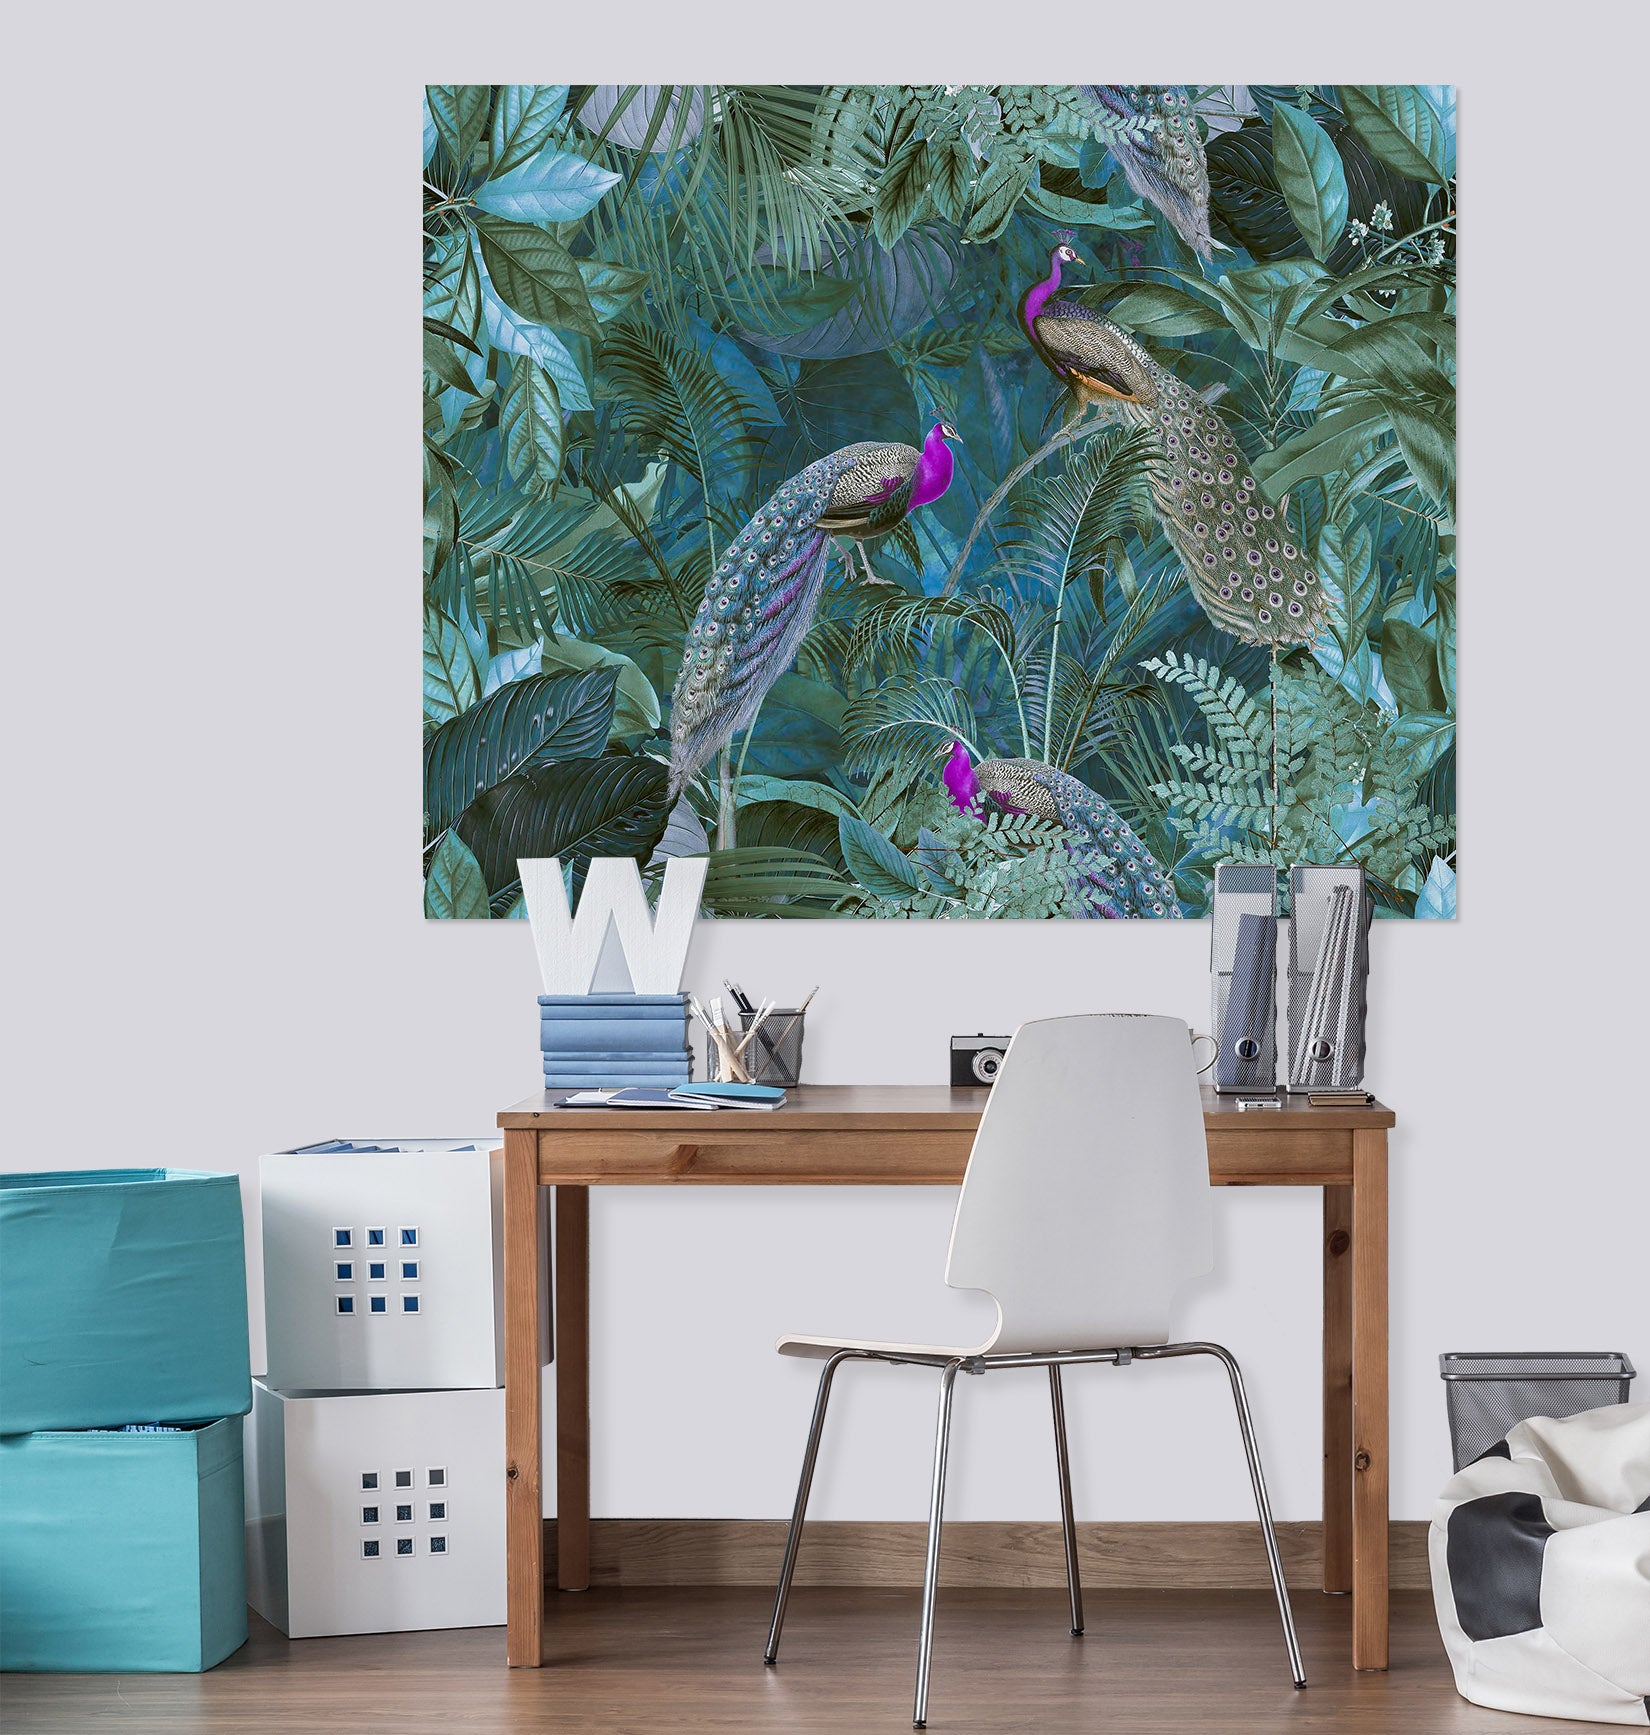 3D Forest Peacock 108 Andrea haase Wall Sticker